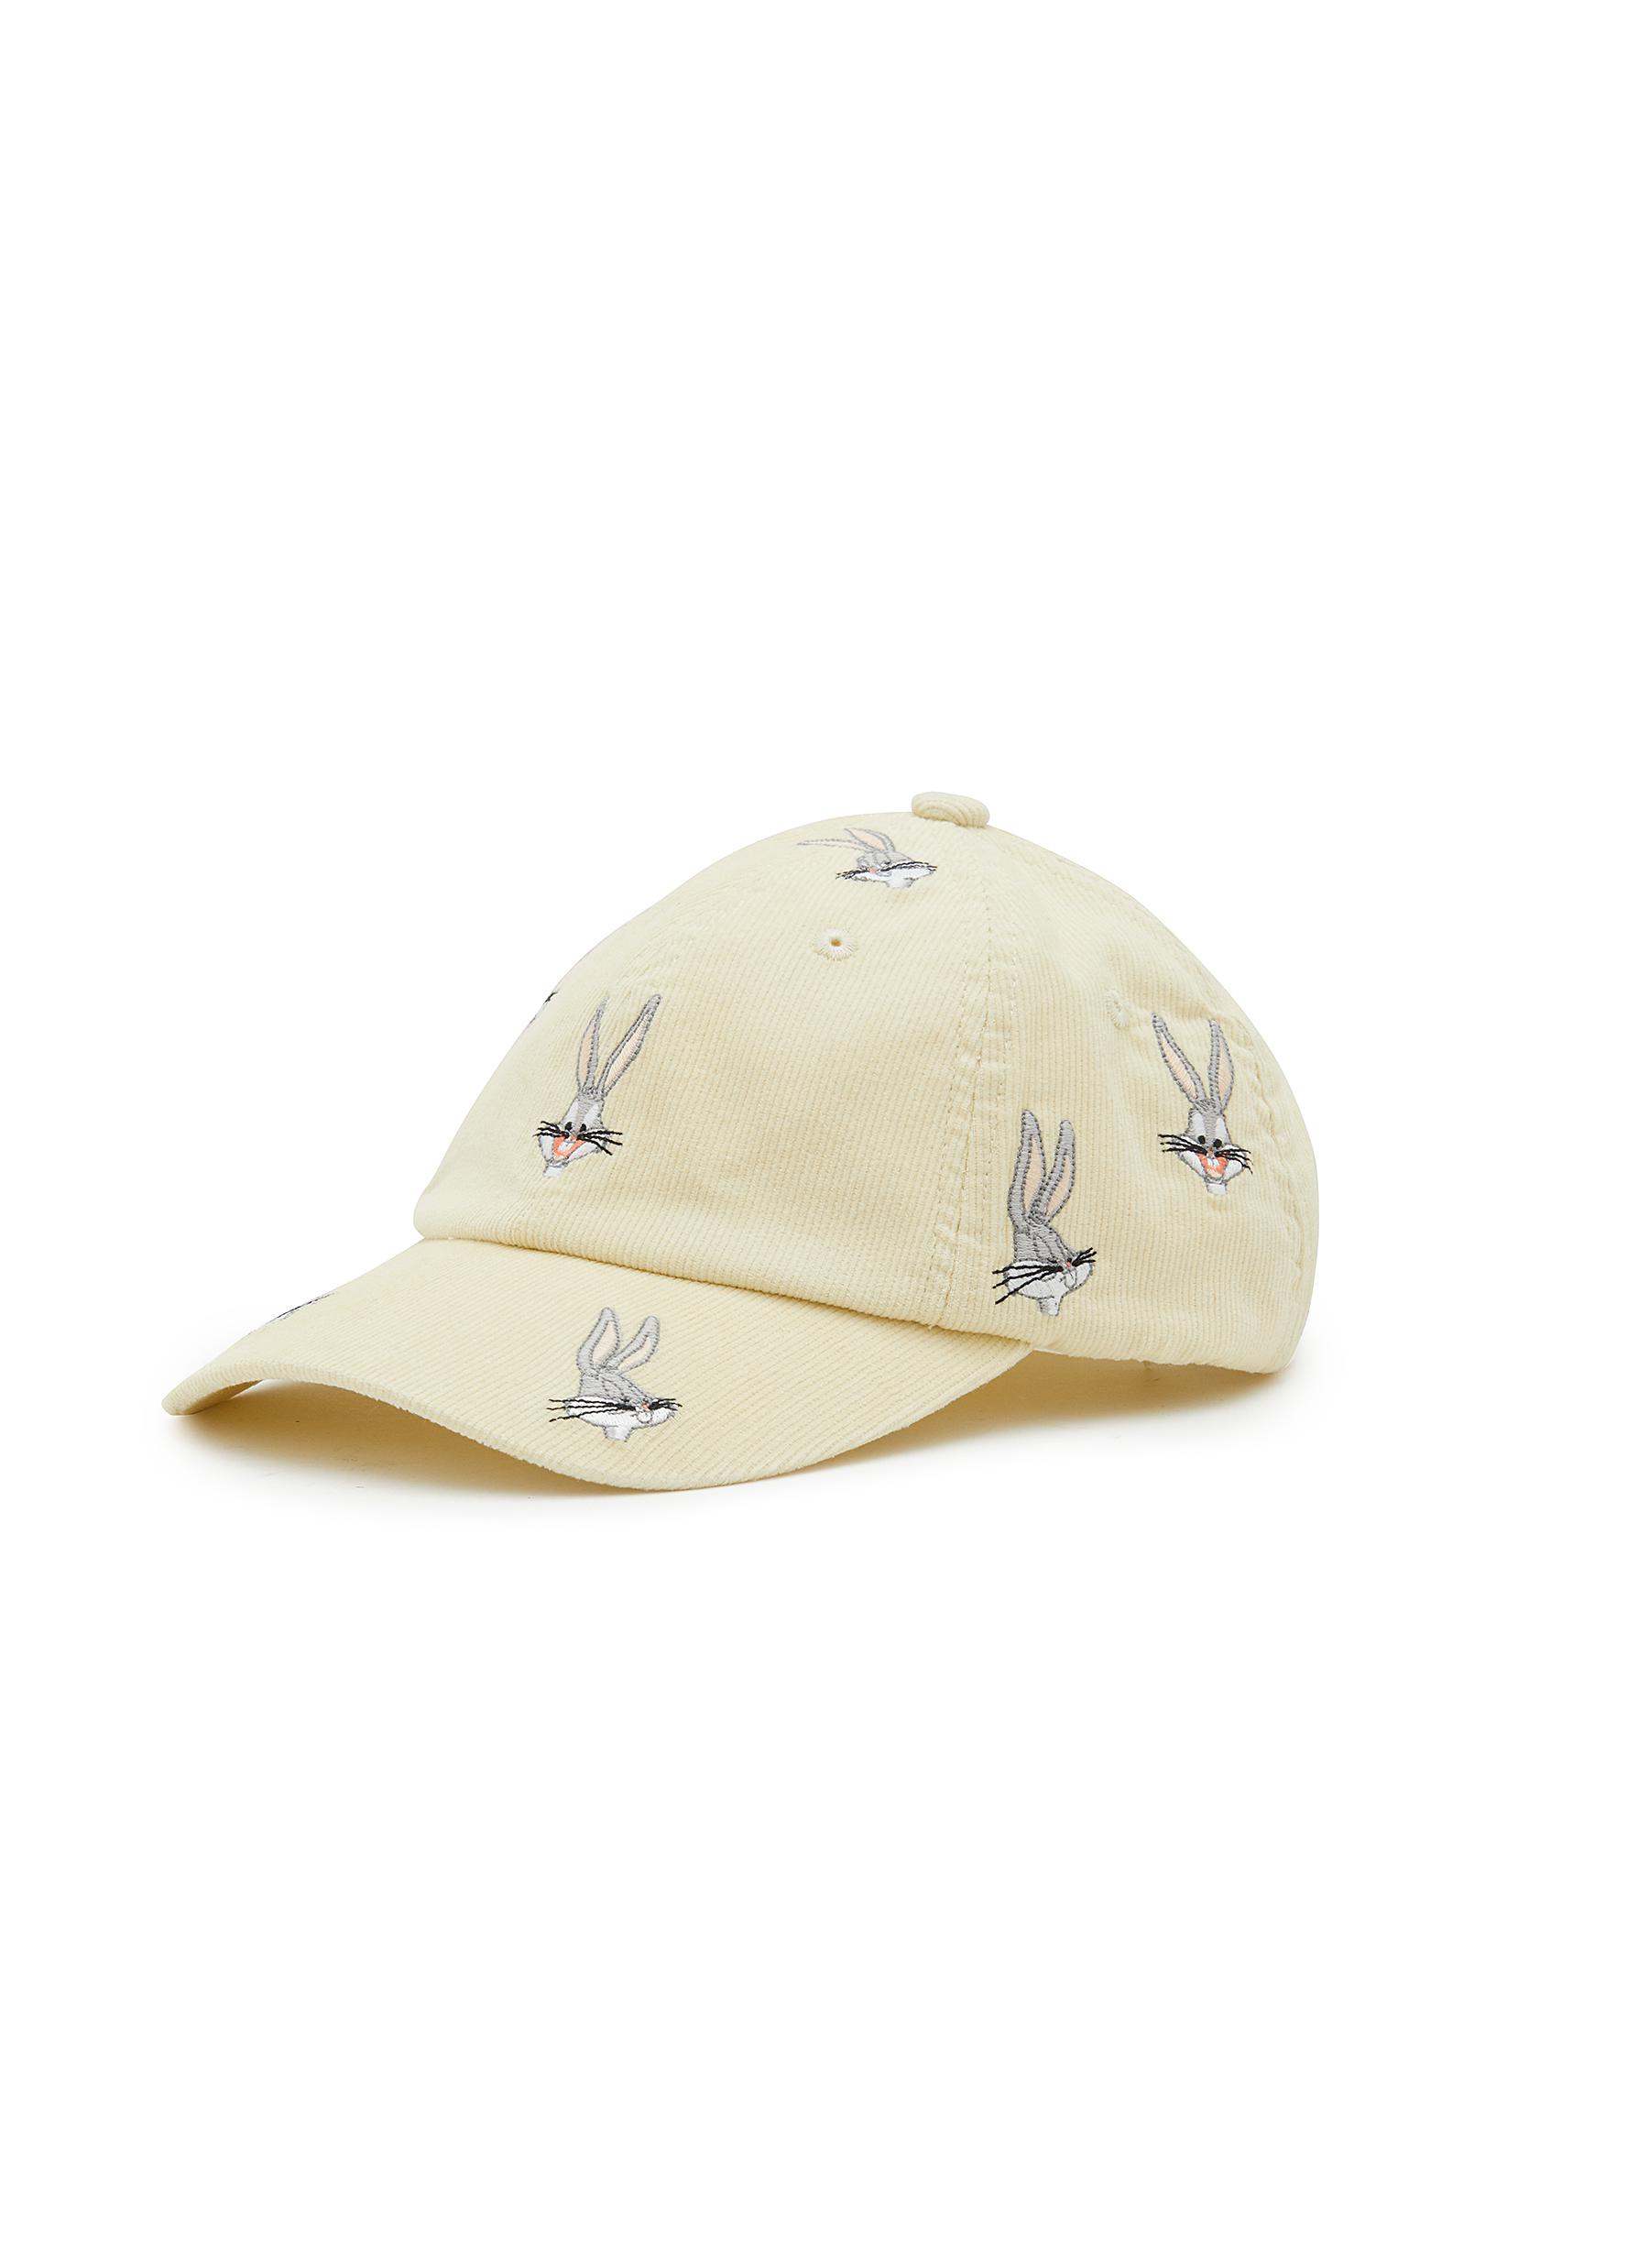 x Looney Tunes Beaumont Bugs Bunny Embroidered Baseball Cap